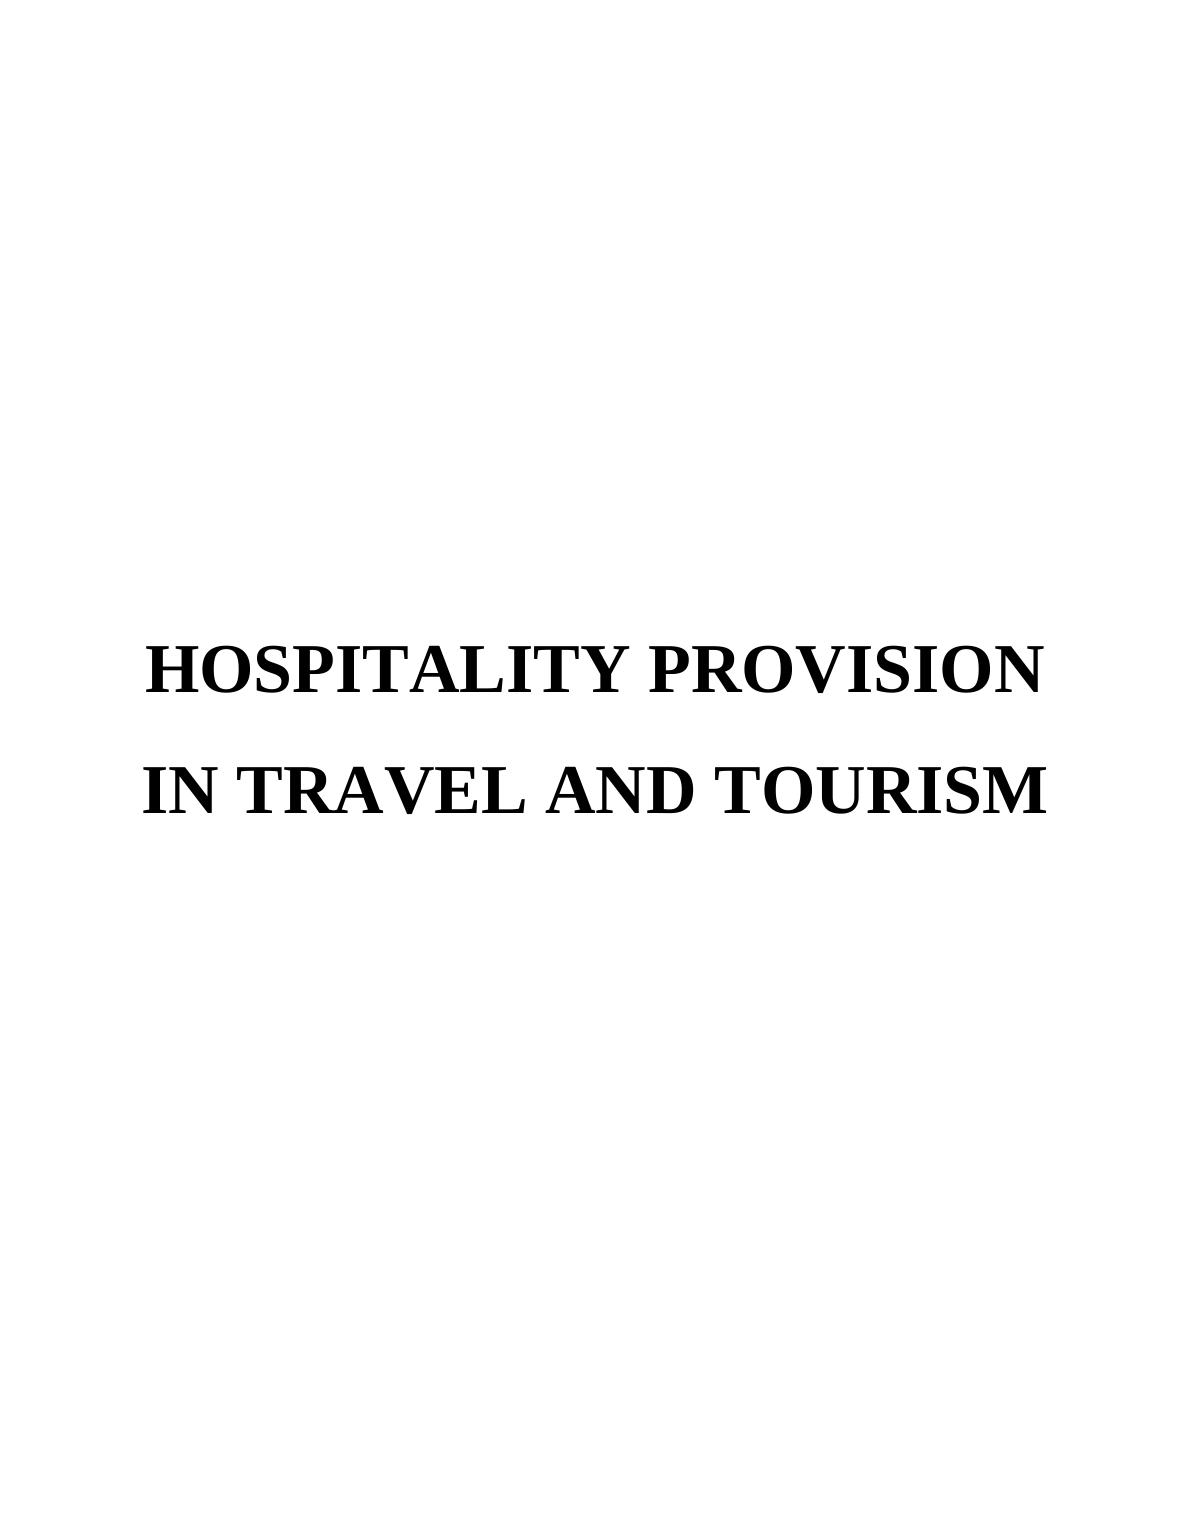 Research on Hospitality Provision - TUI Group_1